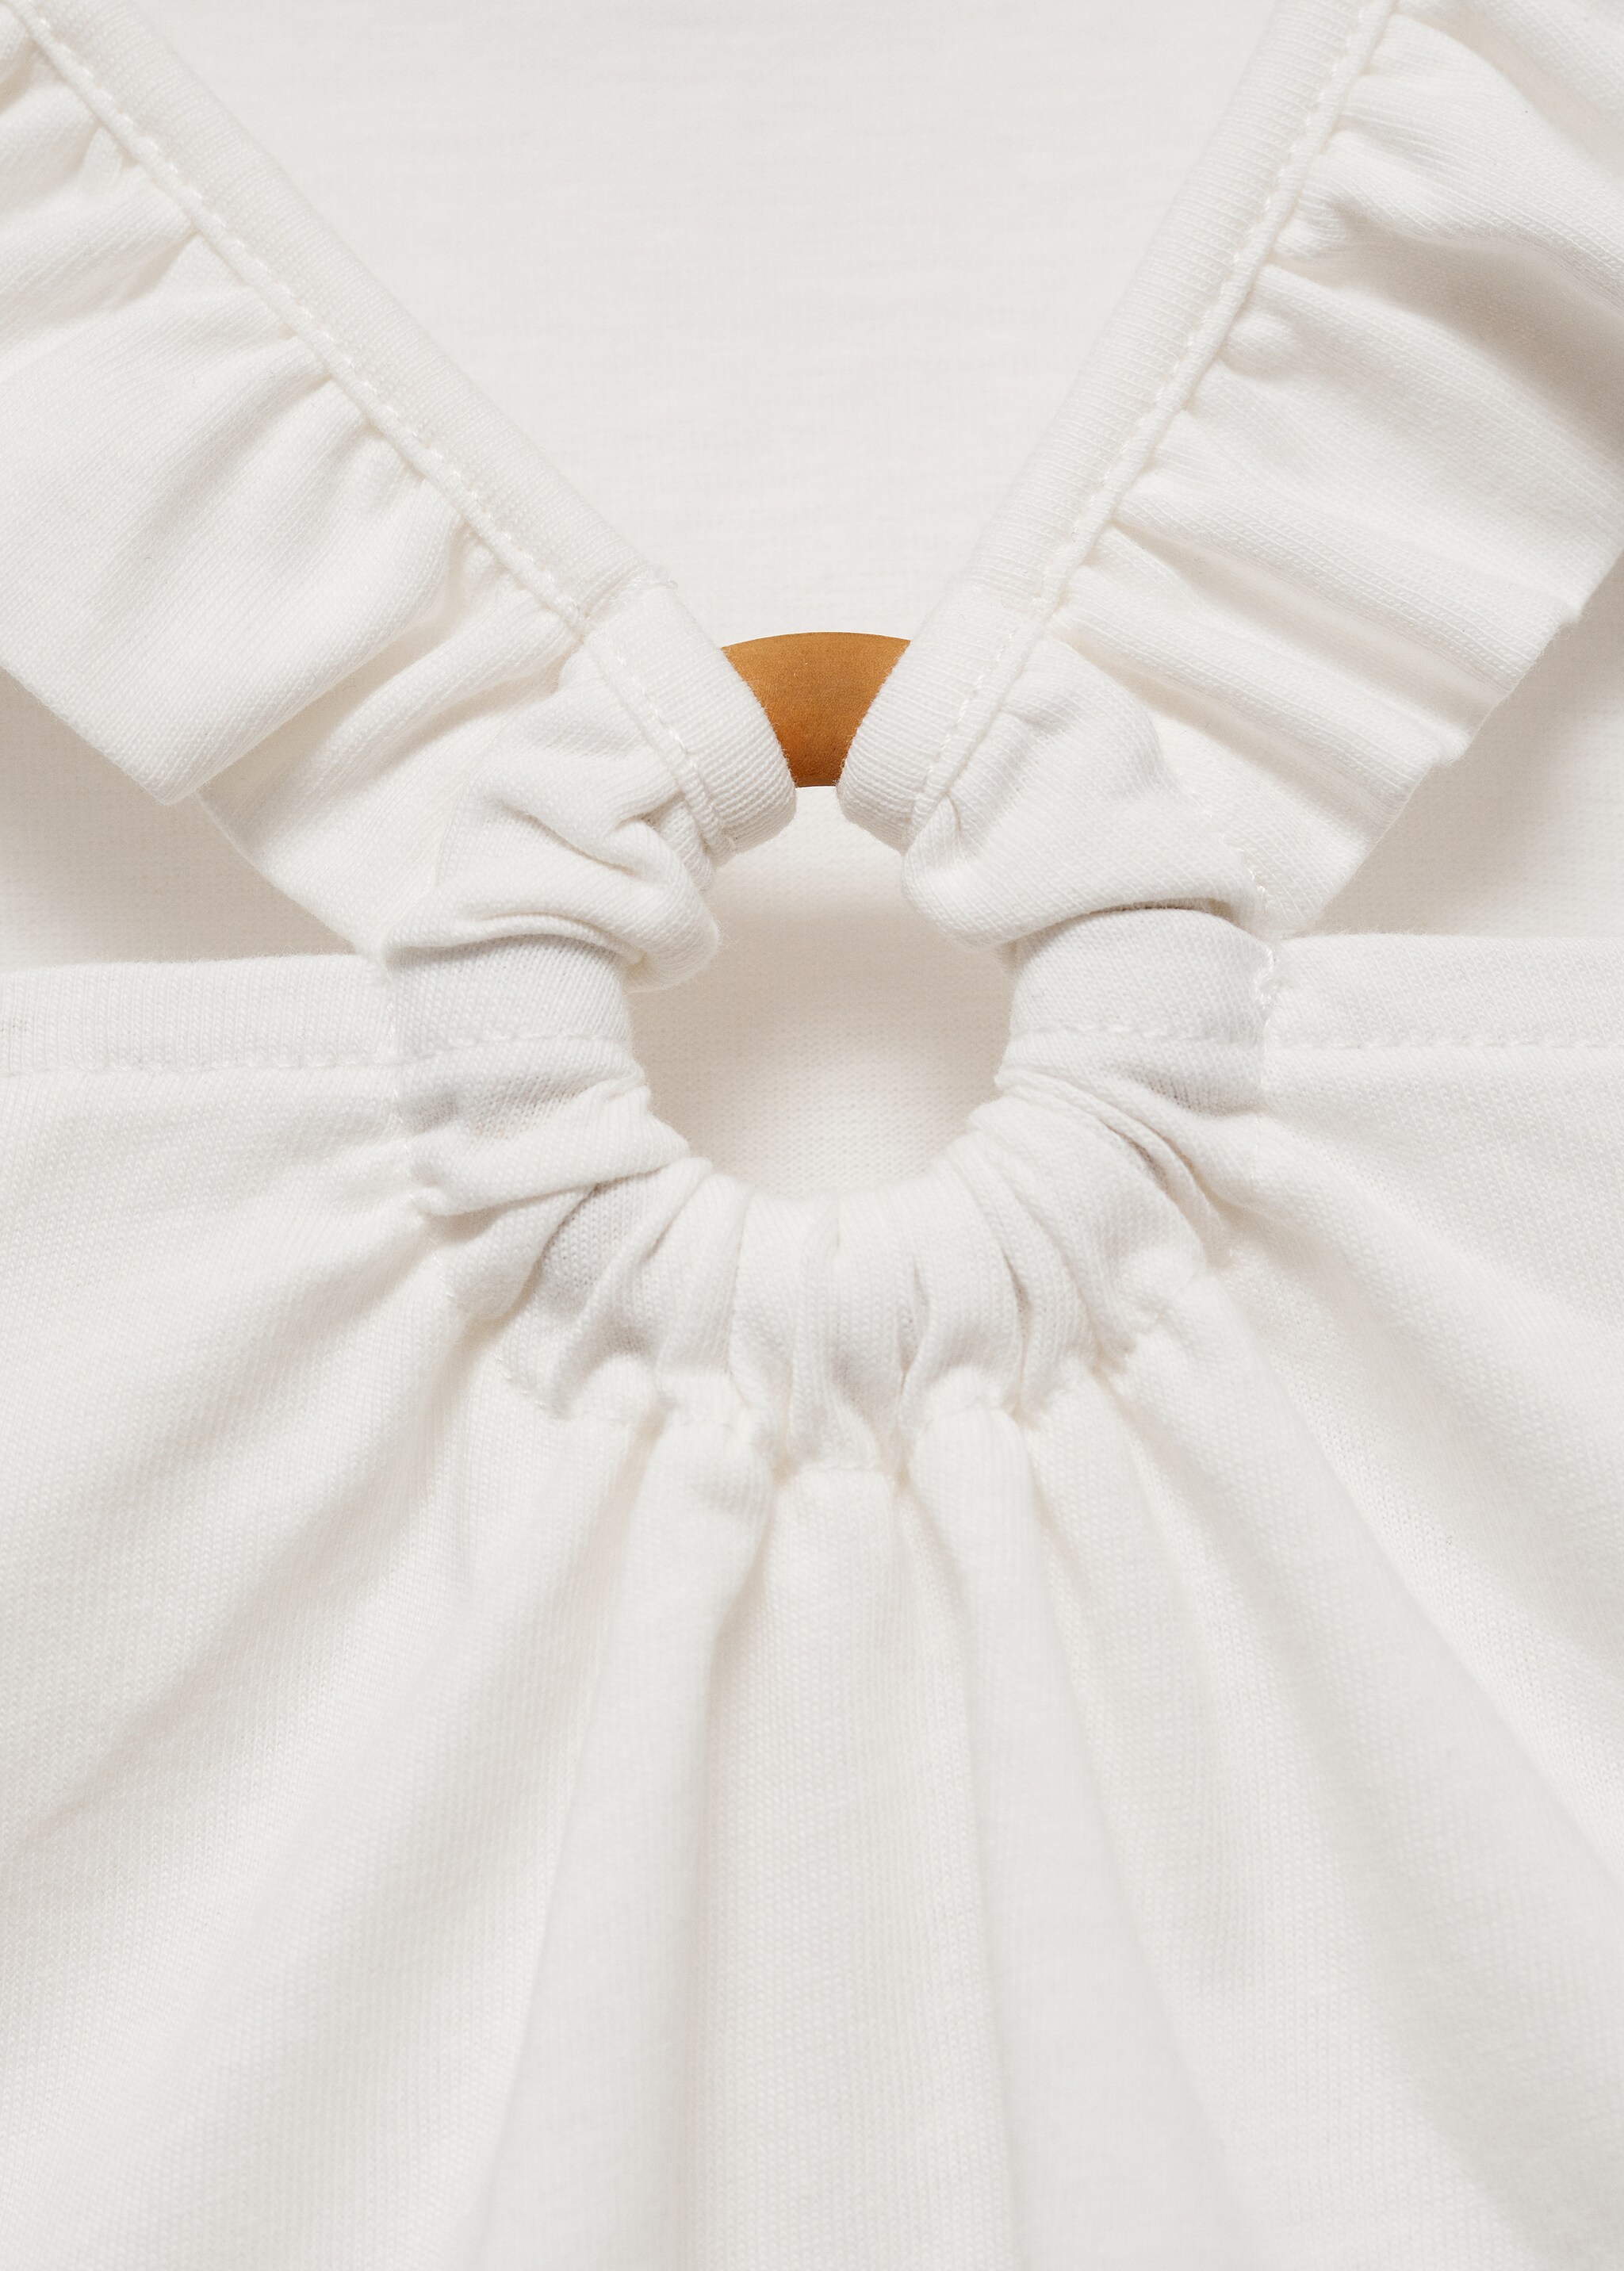 Ruffled strap top - Details of the article 0